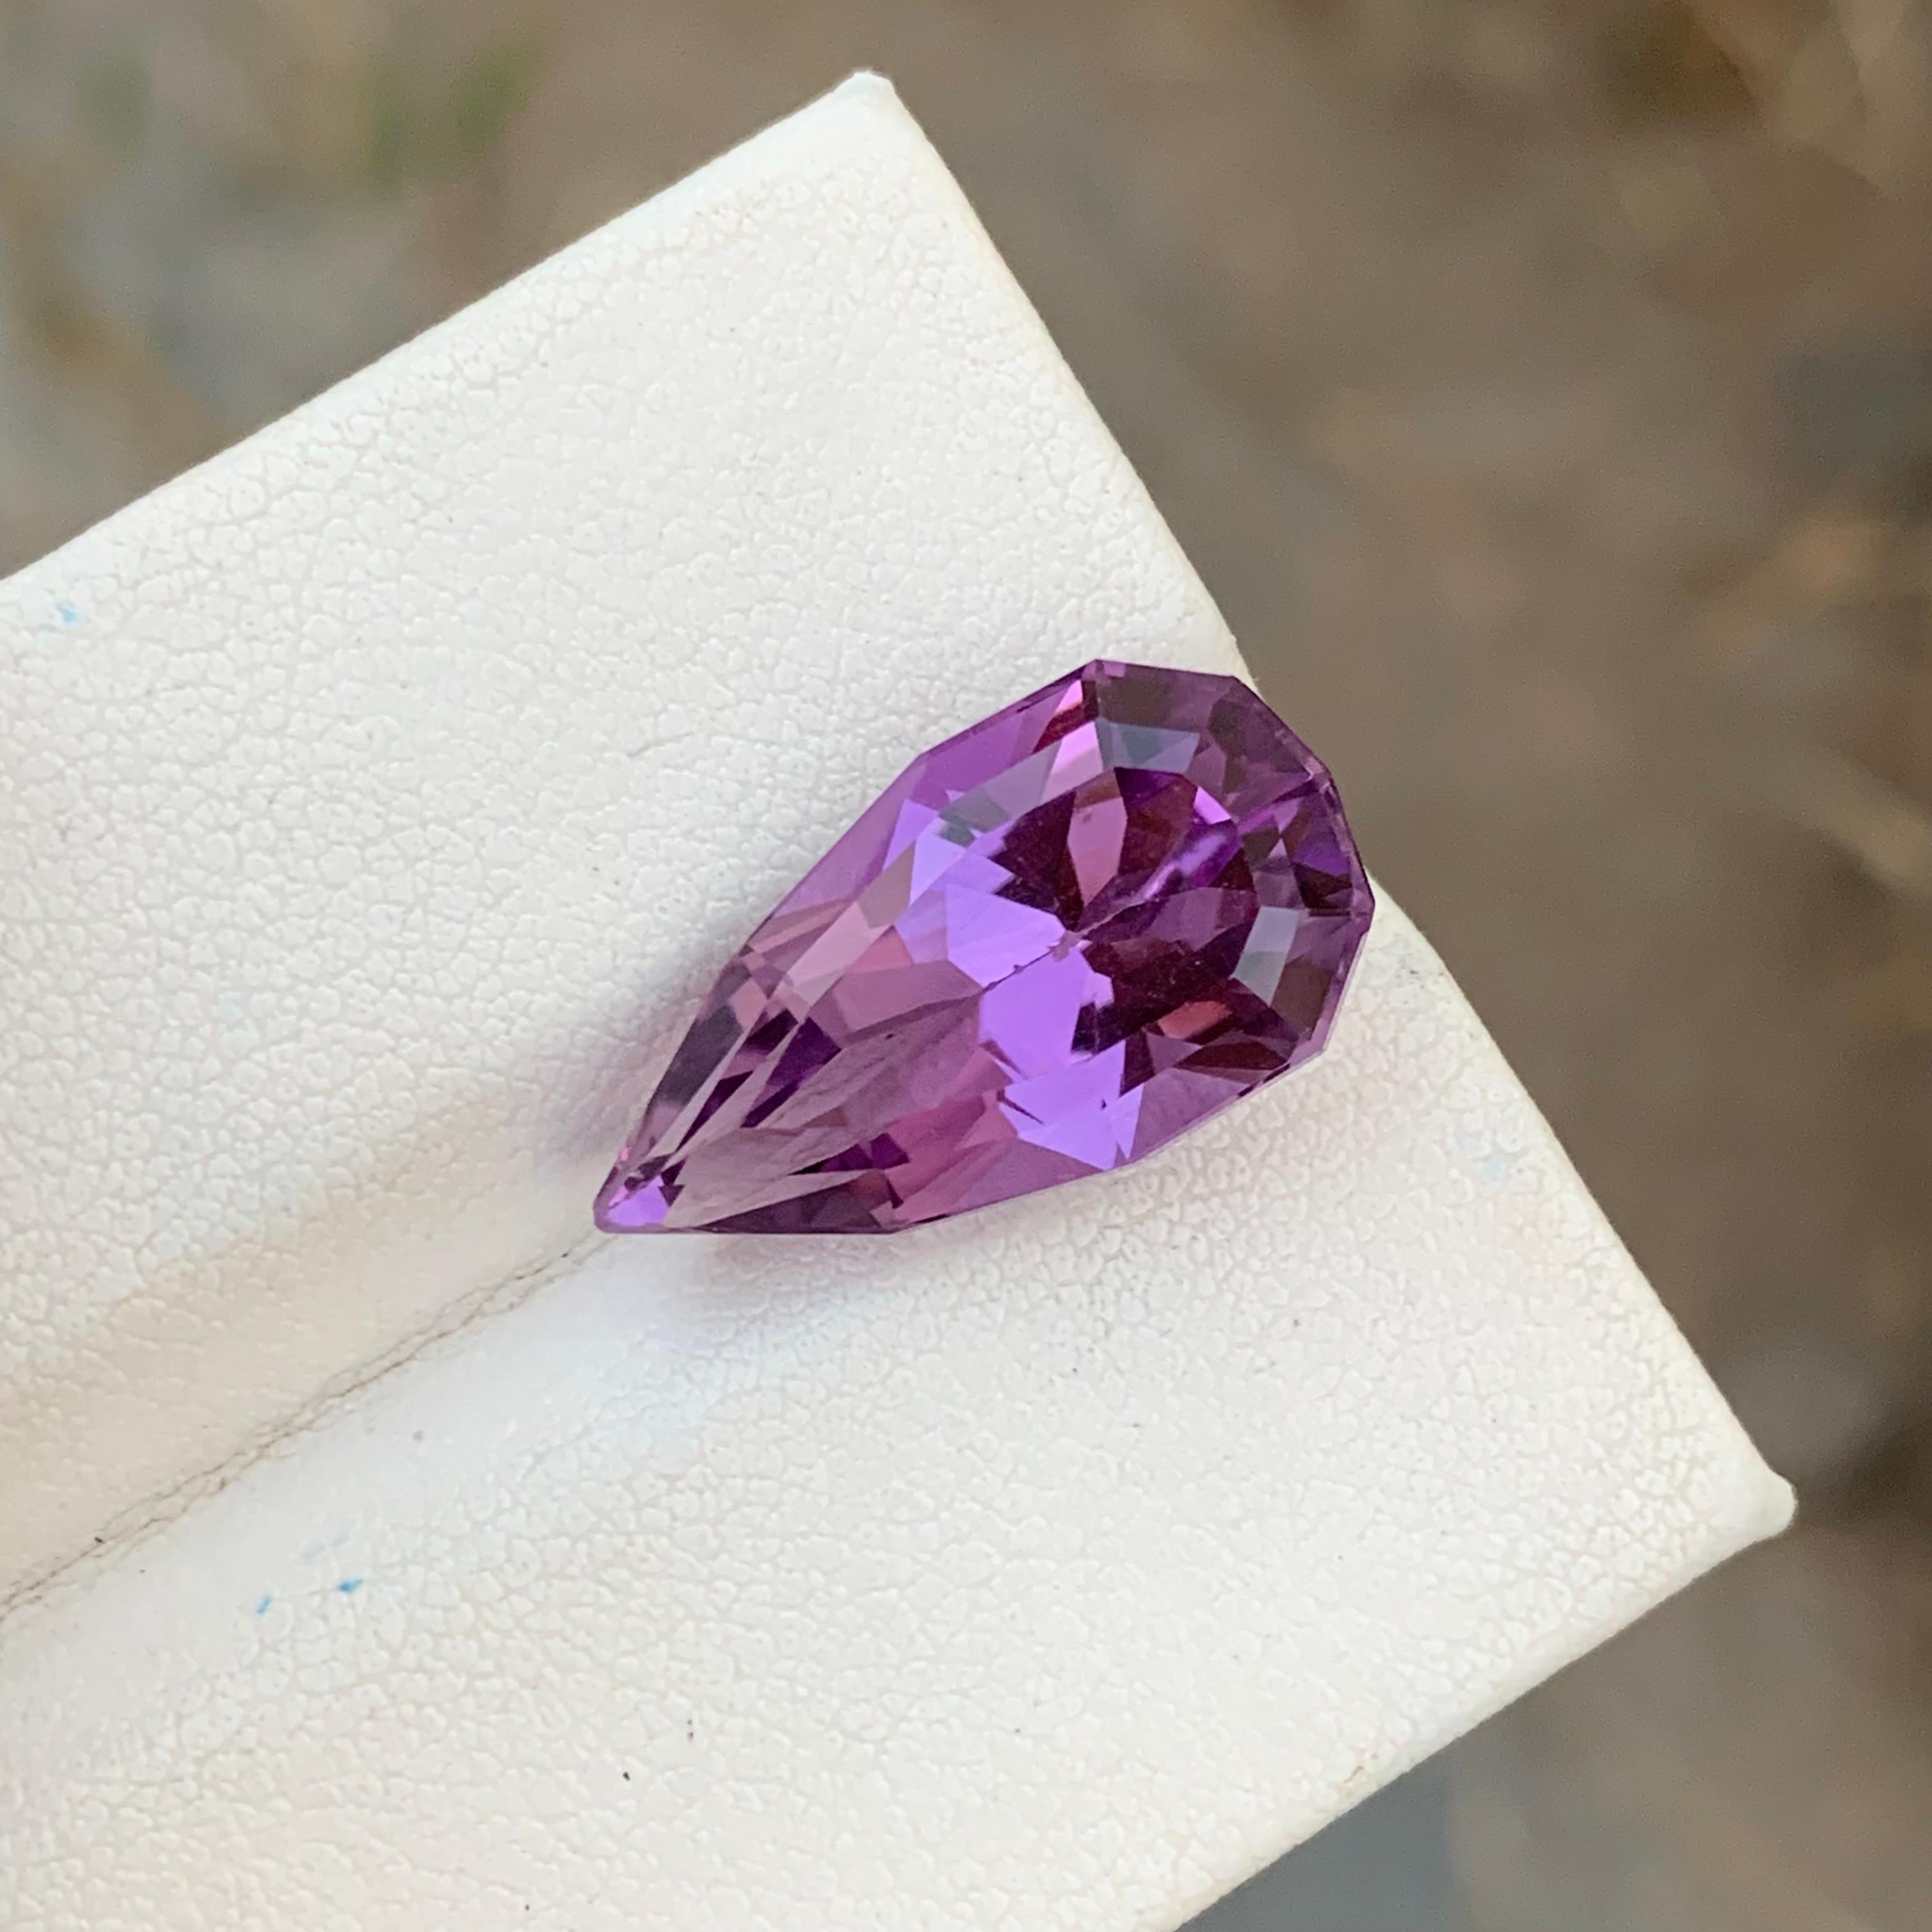 Loose Amethyst
Weight: 10.65 Carats
Dimension: 20 x 10.9 x 9.1 Mm
Colour: Purple
Origin: Brazil
Treatment: Non
Certificate: On Demand
Shape: Tear Drop 

Amethyst, a stunning variety of quartz known for its mesmerizing purple hue, has captivated